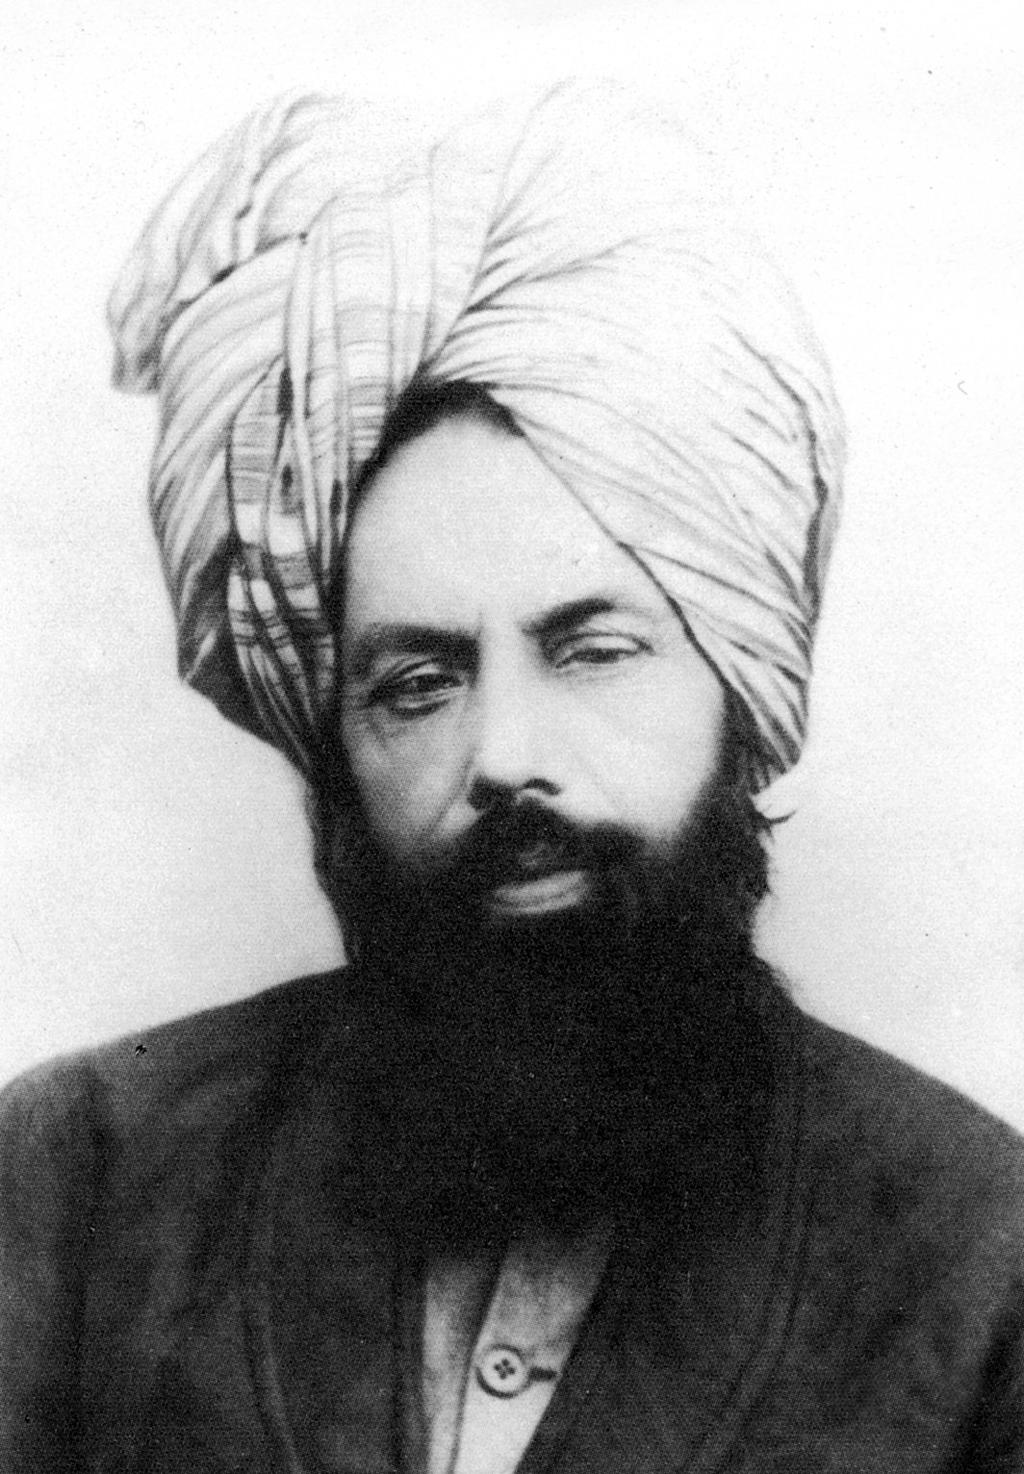 The Holy Qur an Hadhrat mirza ghulam ahmad (as) The founder of the ahmadiyya muslim community In 1891, he claimed on the basis of Divine revelation, that he was the Promised Messiah and Mahdi whose